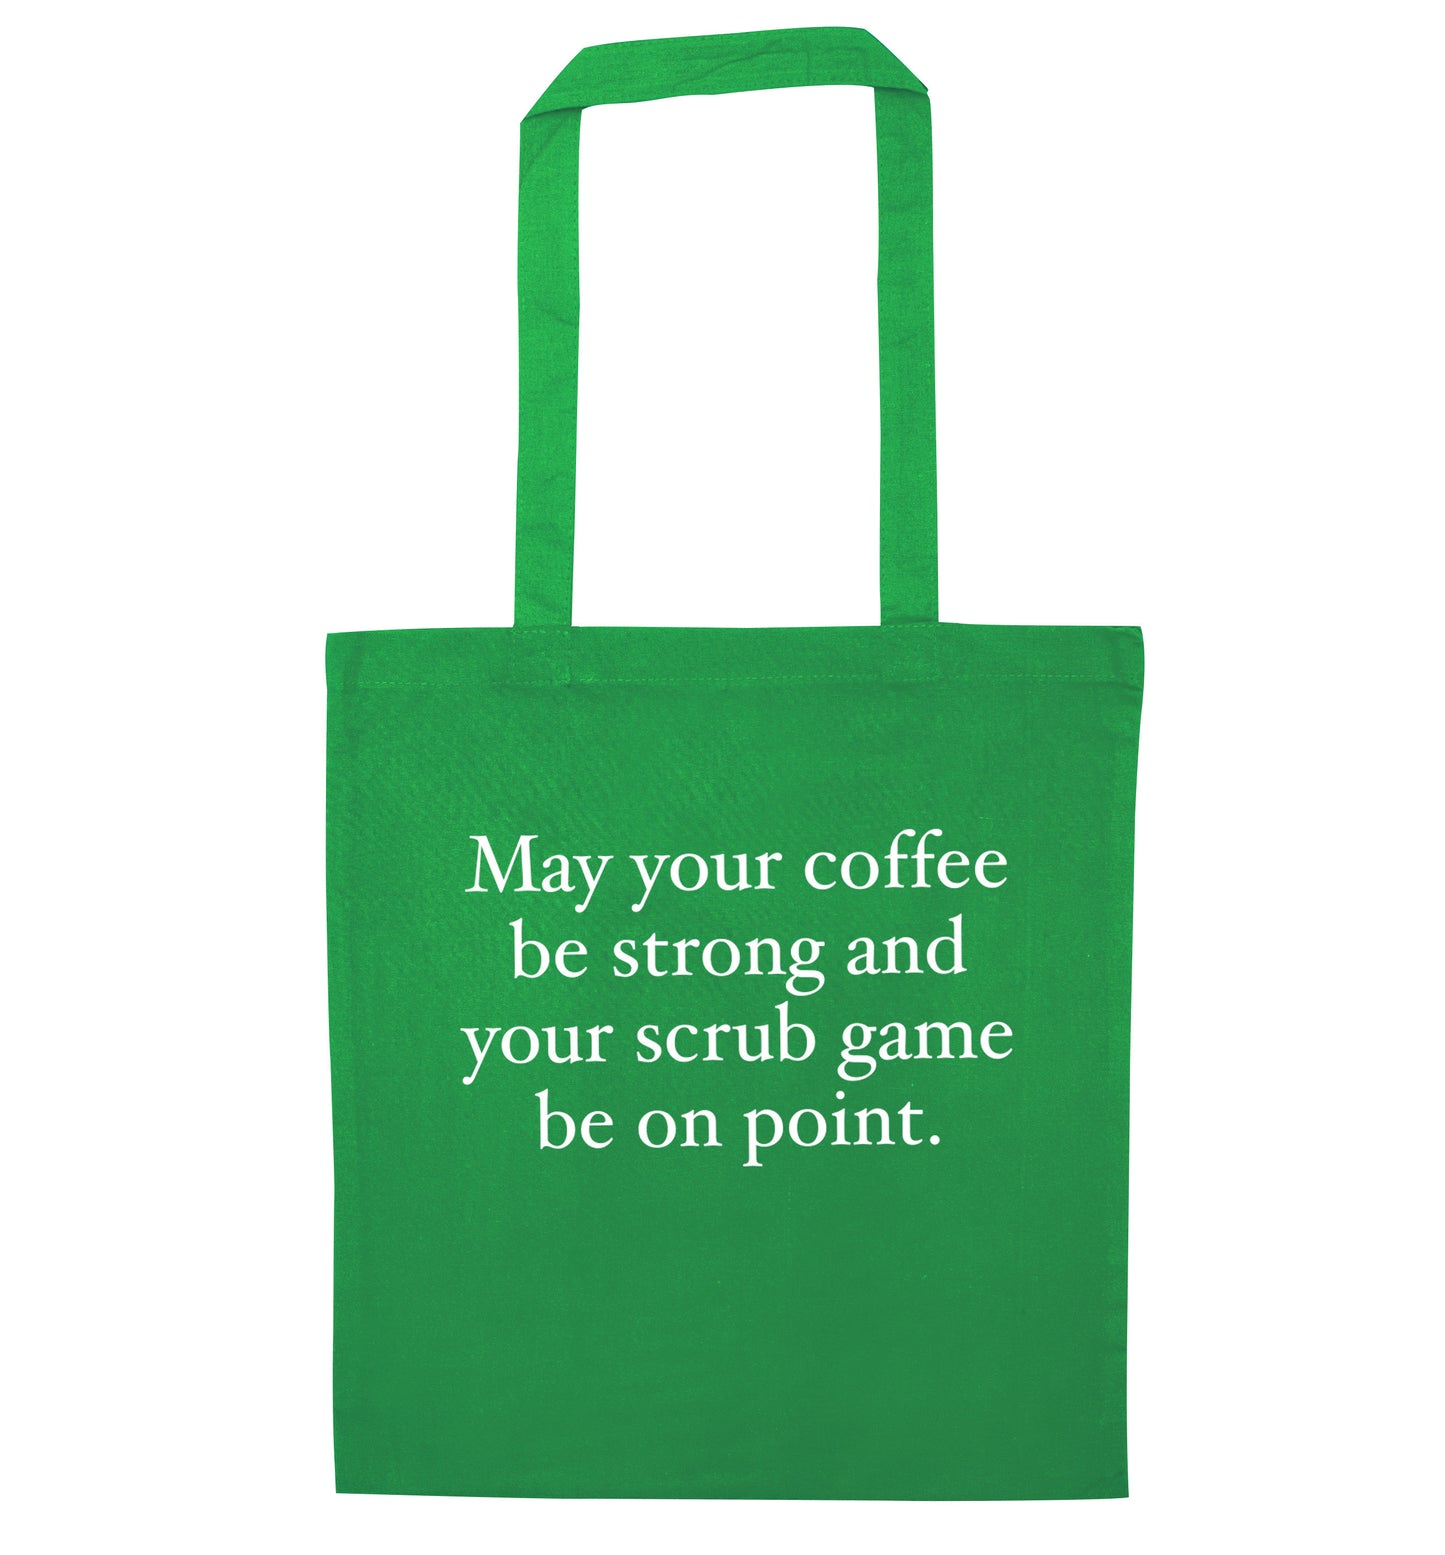 May your caffeine be strong and your scrub game be on point green tote bag